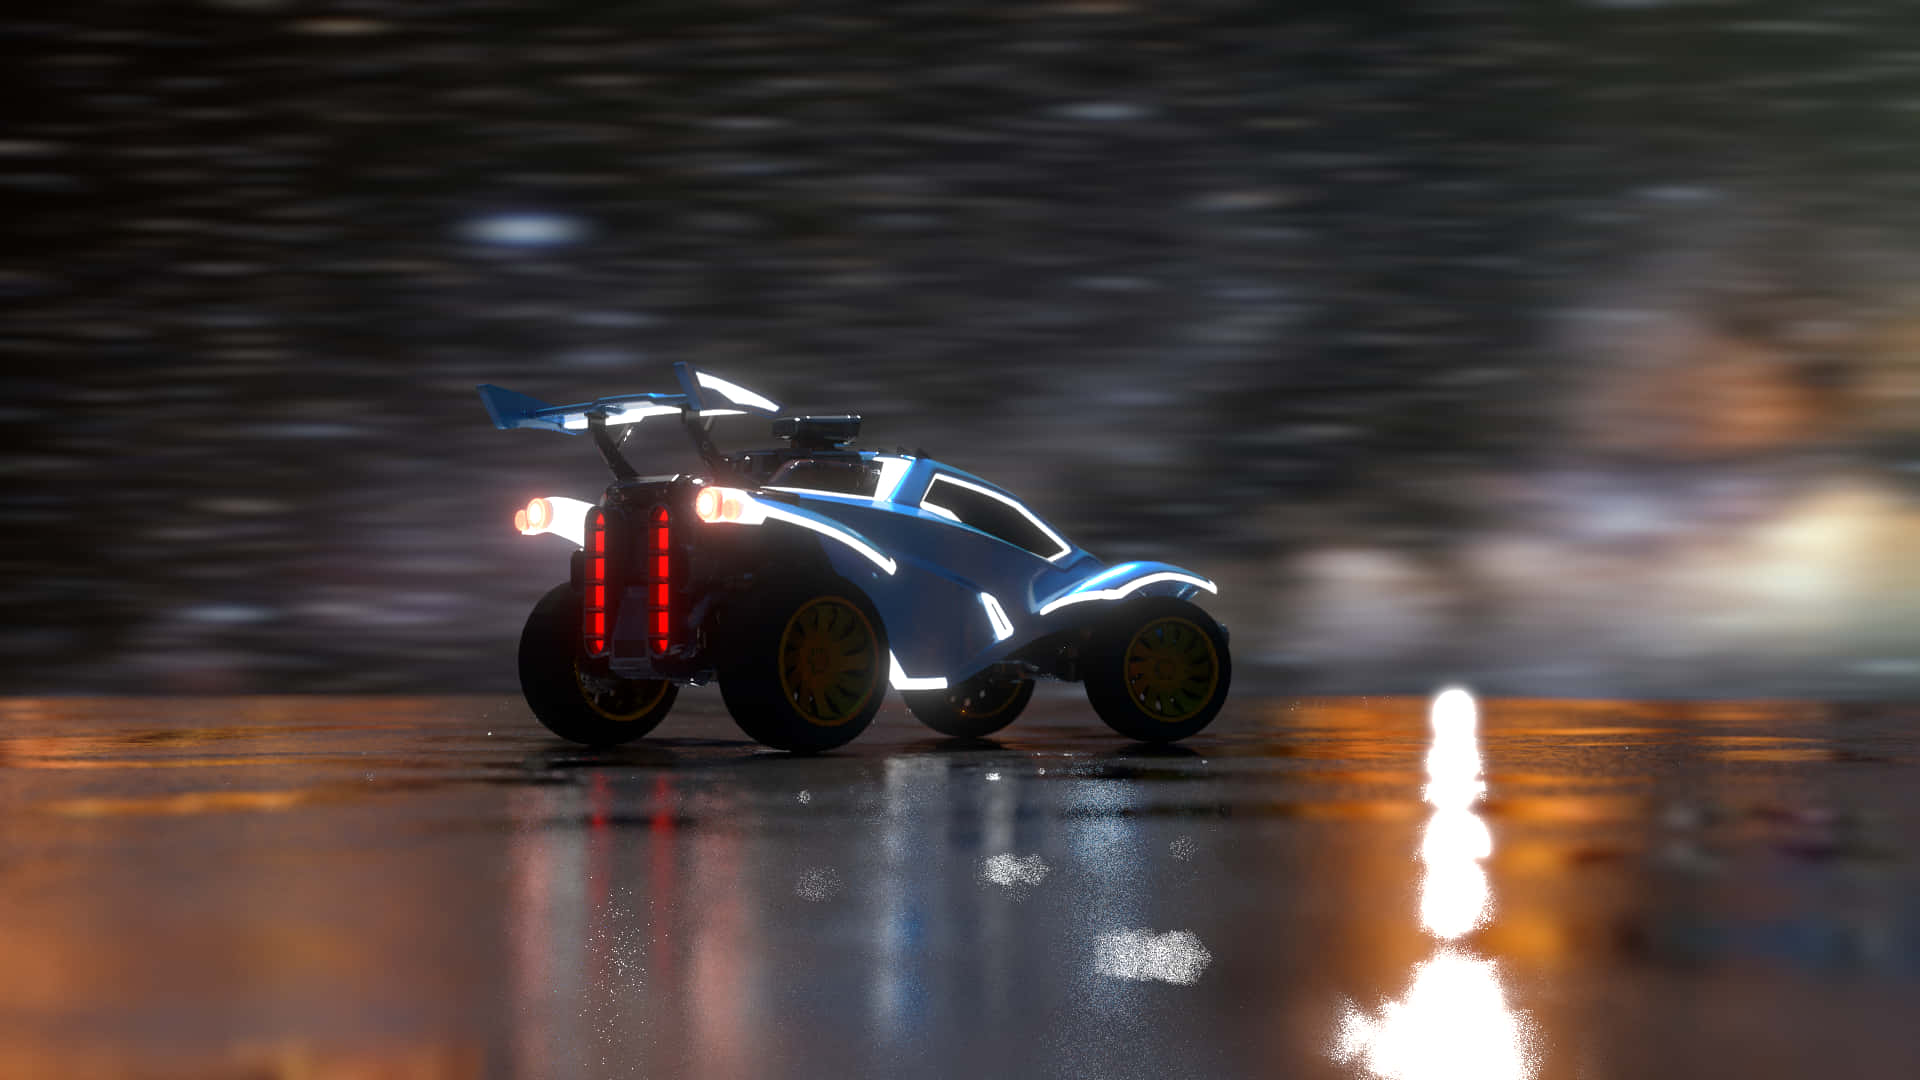 720p Rocket League Background Blurry Gray Background